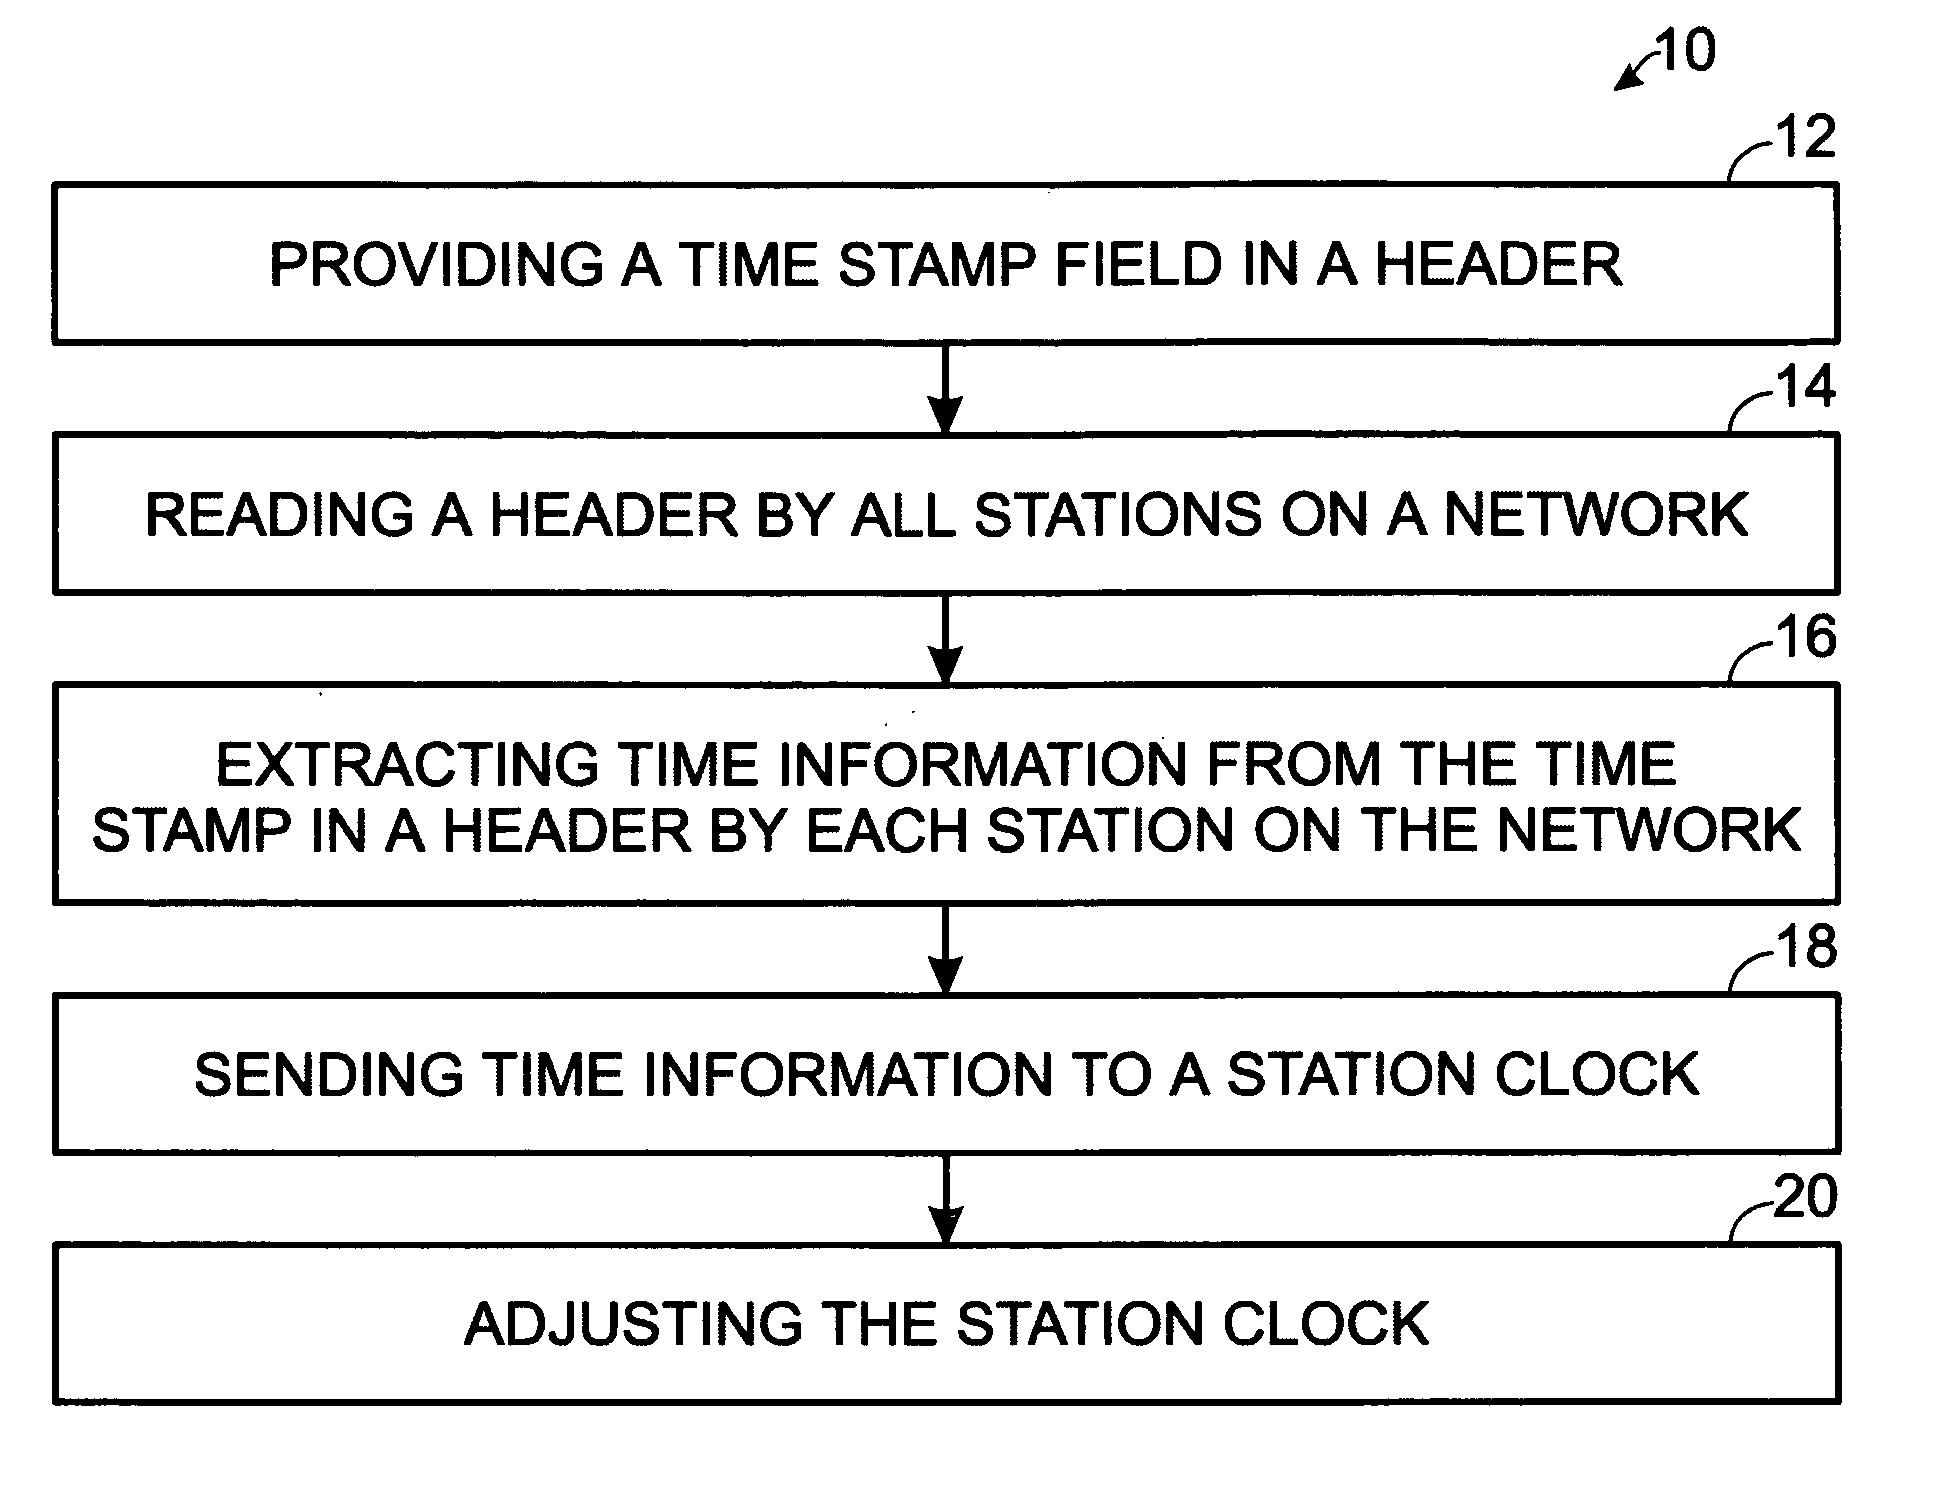 System clock synchronization in an ad hoc and infrastructure wireless networks